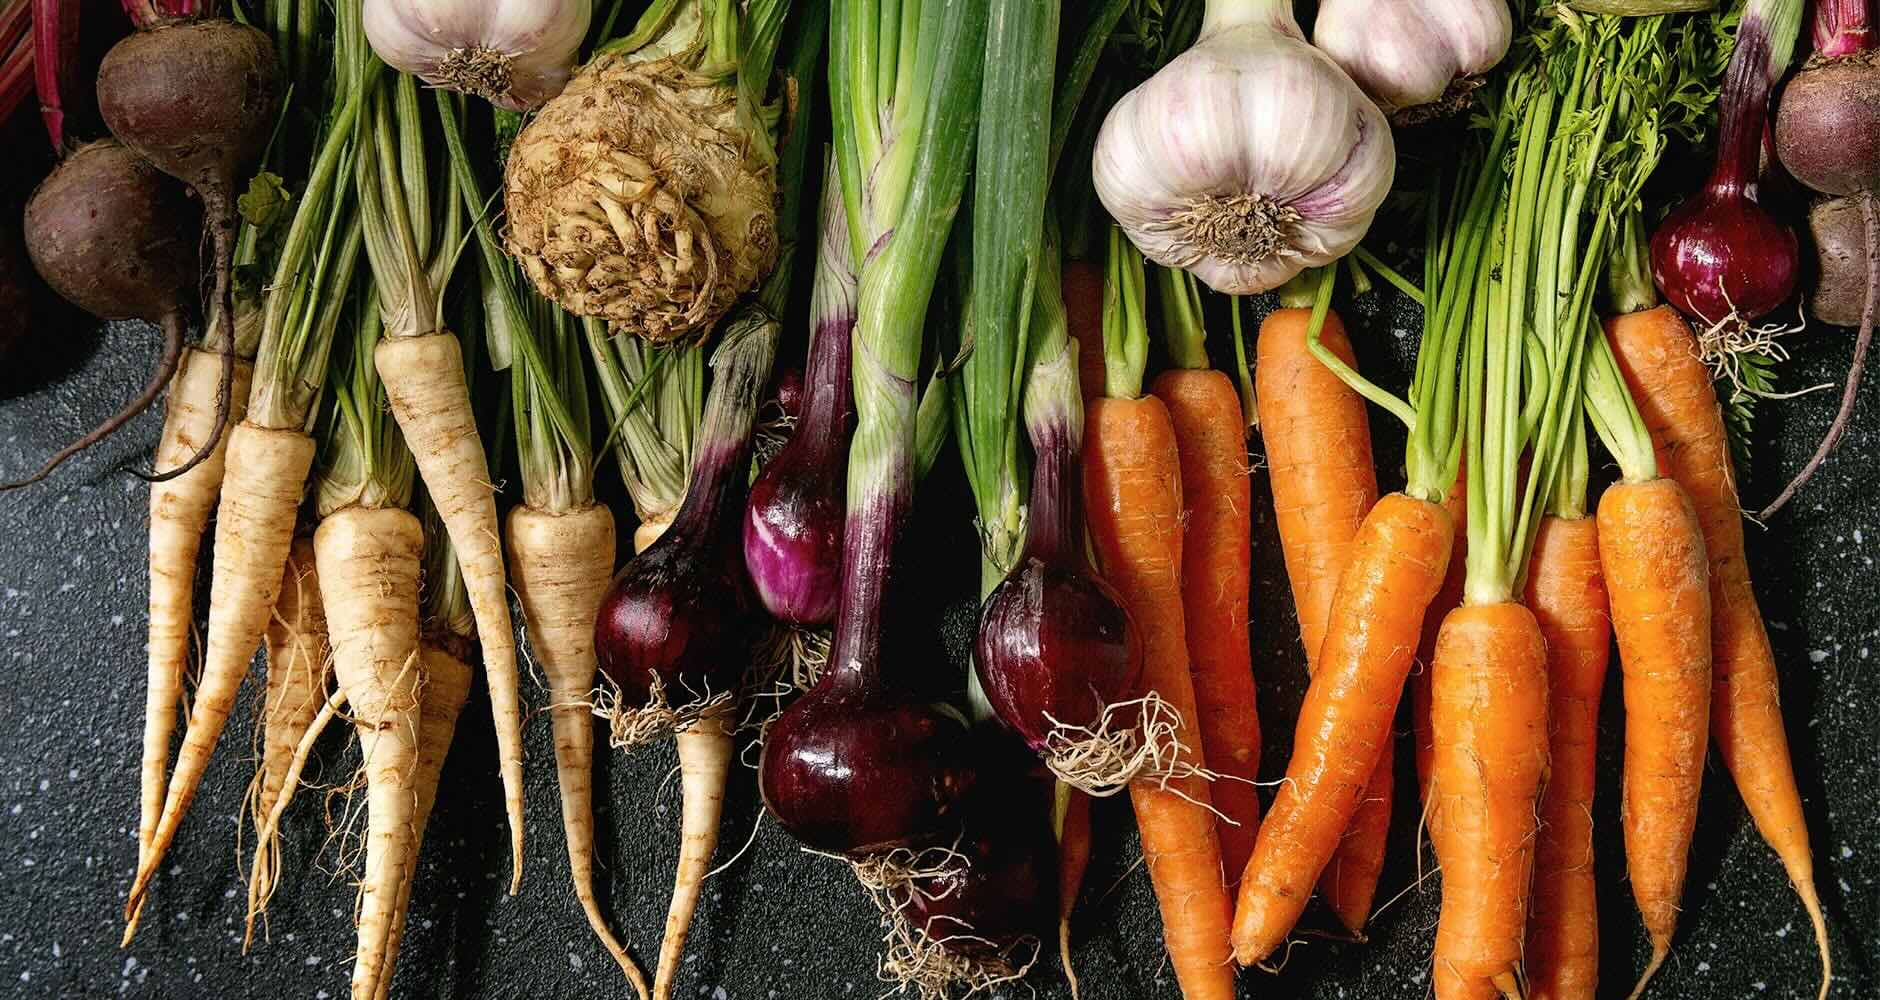 How To Store Root Vegetables